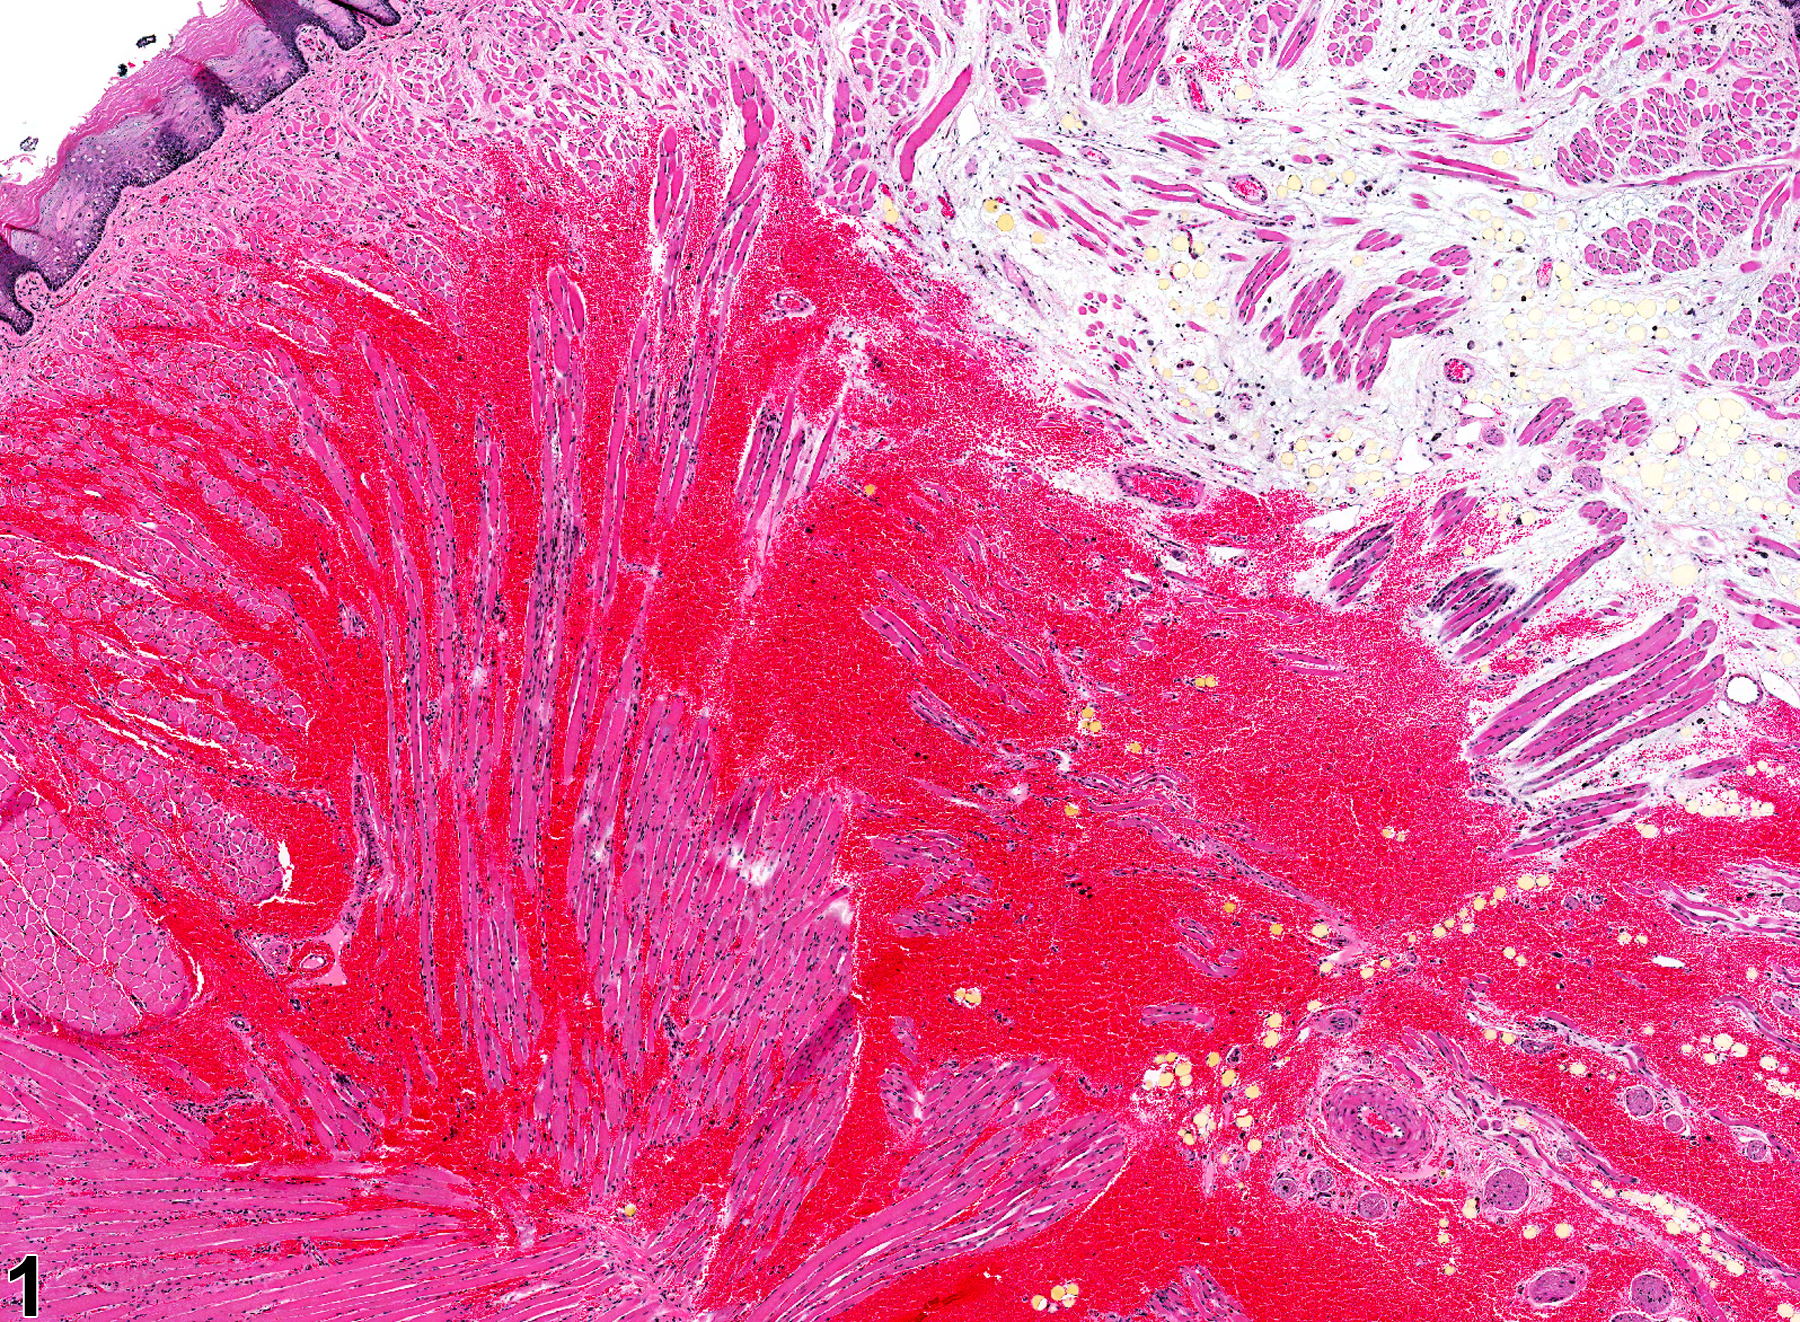 Image of hemorrhage in the tongue from a female HSD rat in a chronic study